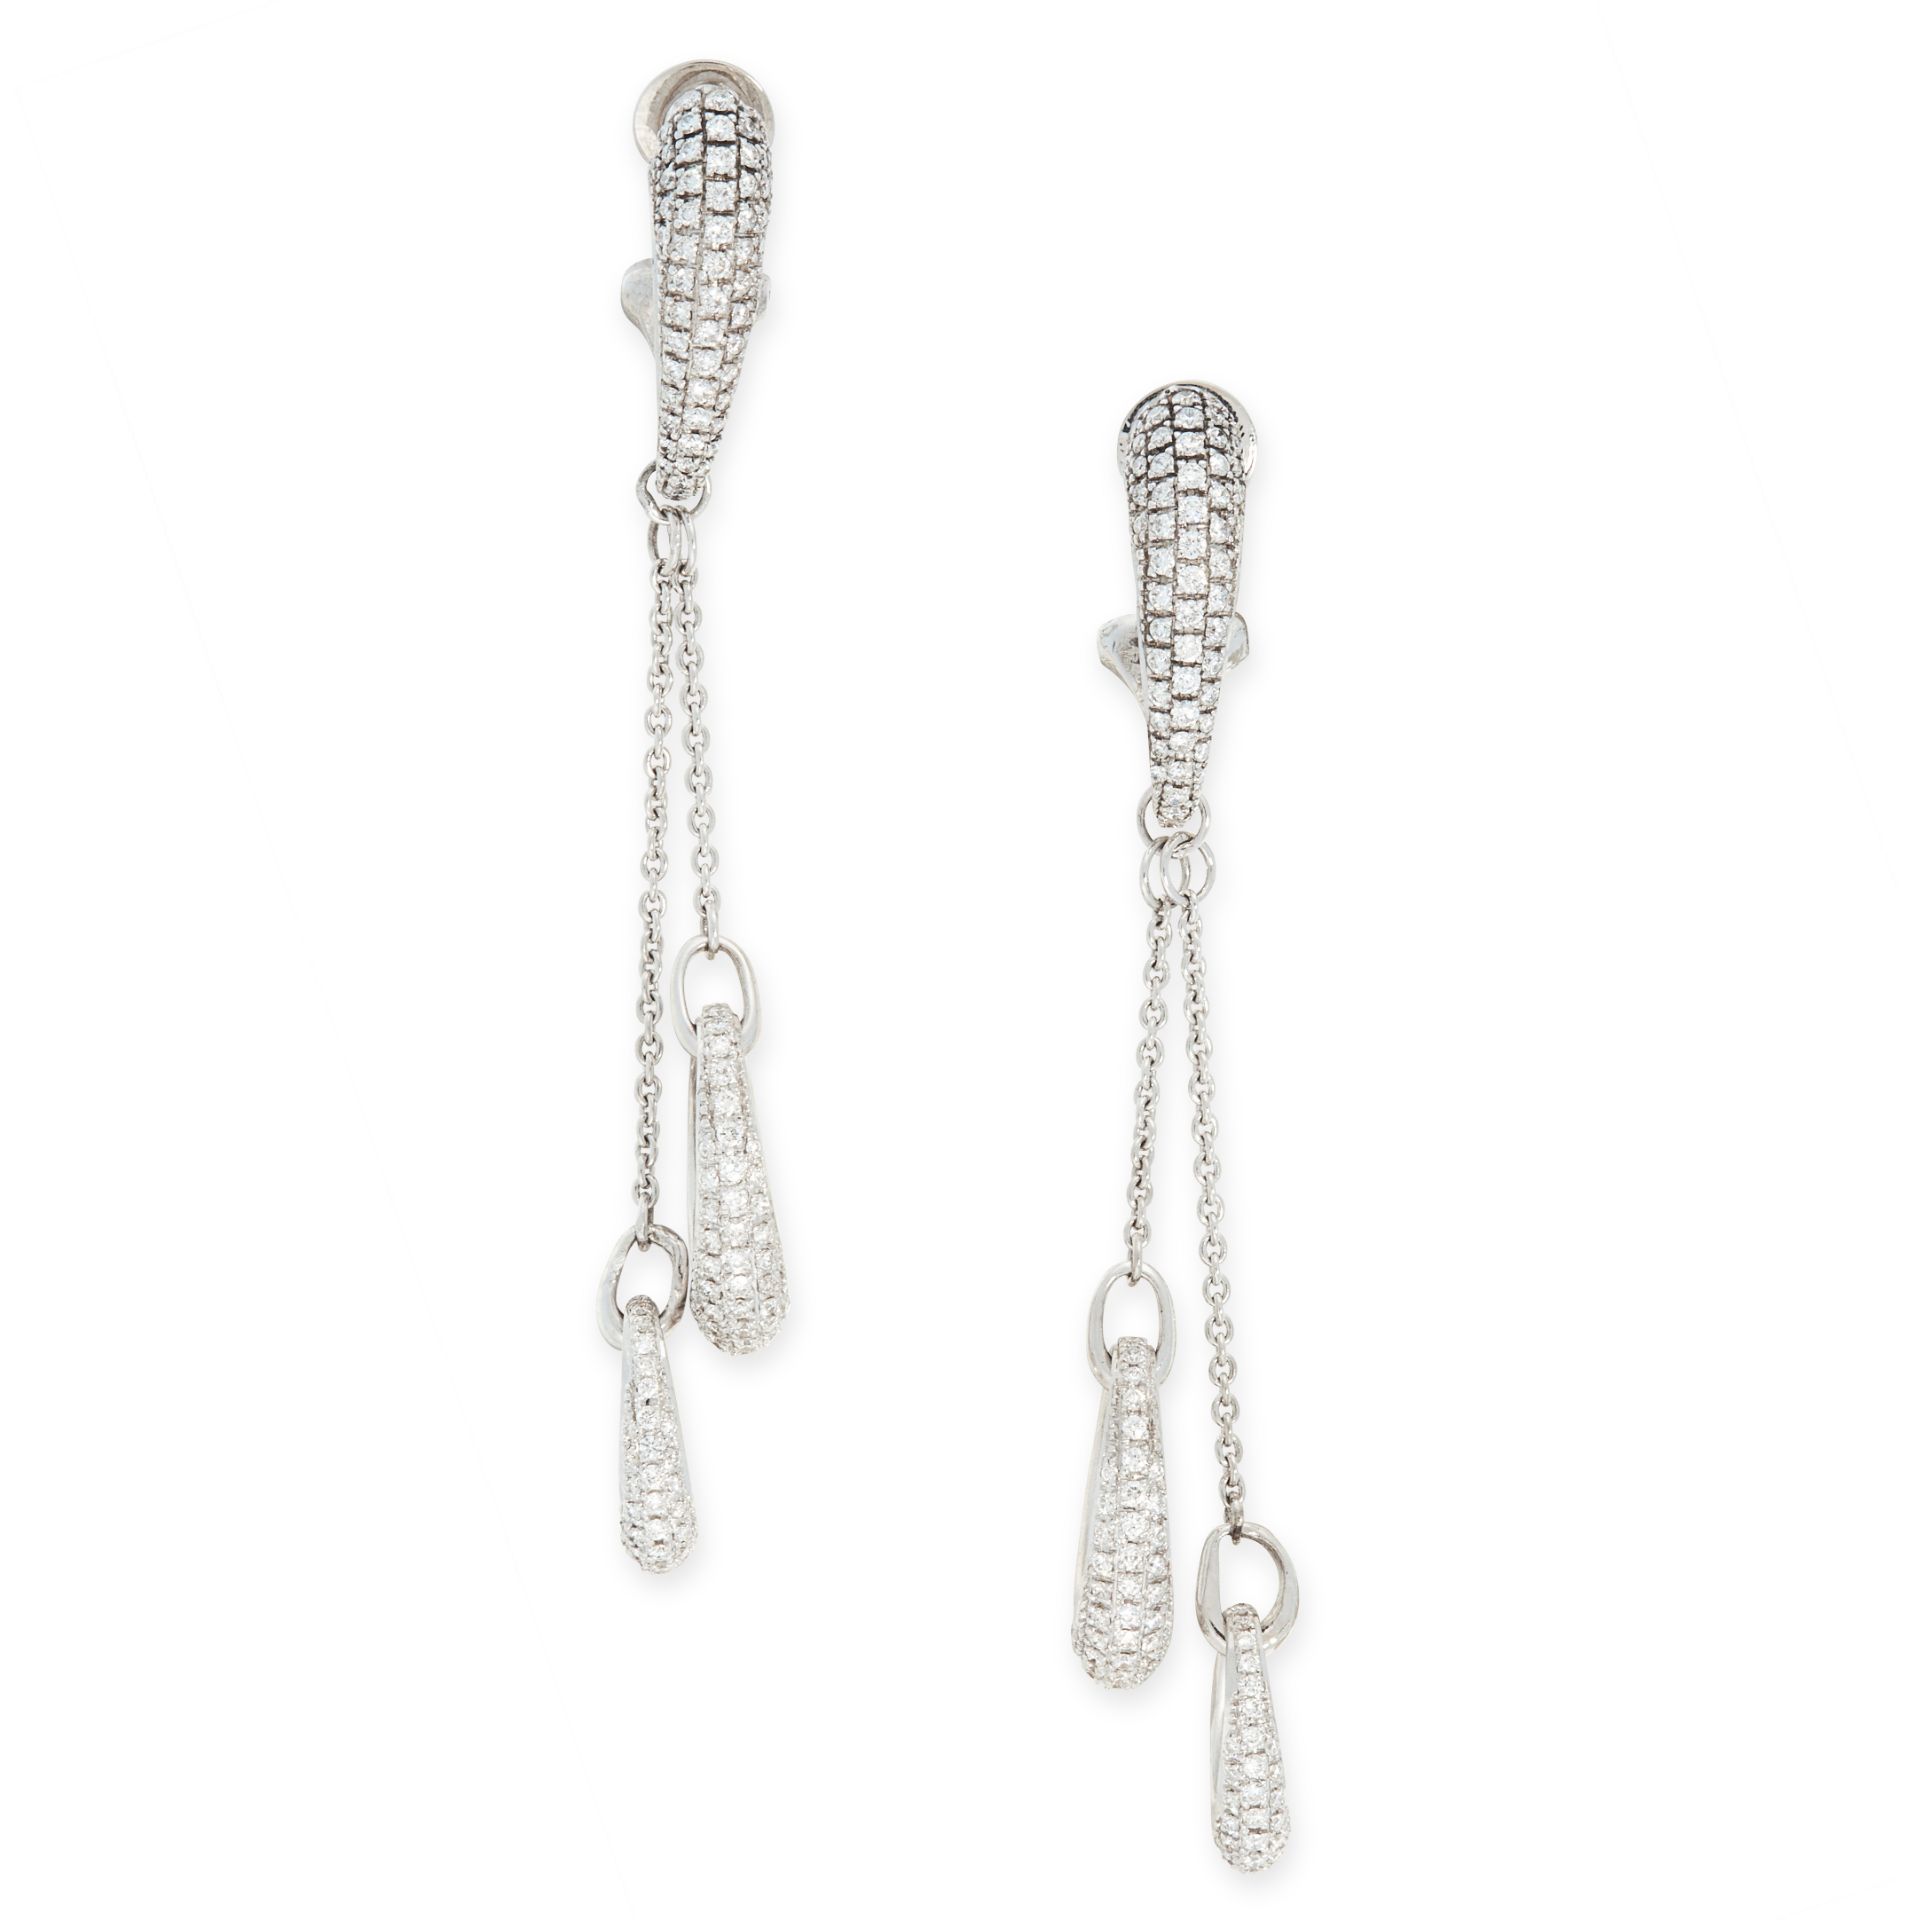 A PAIR OF DIAMOND PENDANT EARRINGS in 18ct white gold, each designed as a tapering row of round